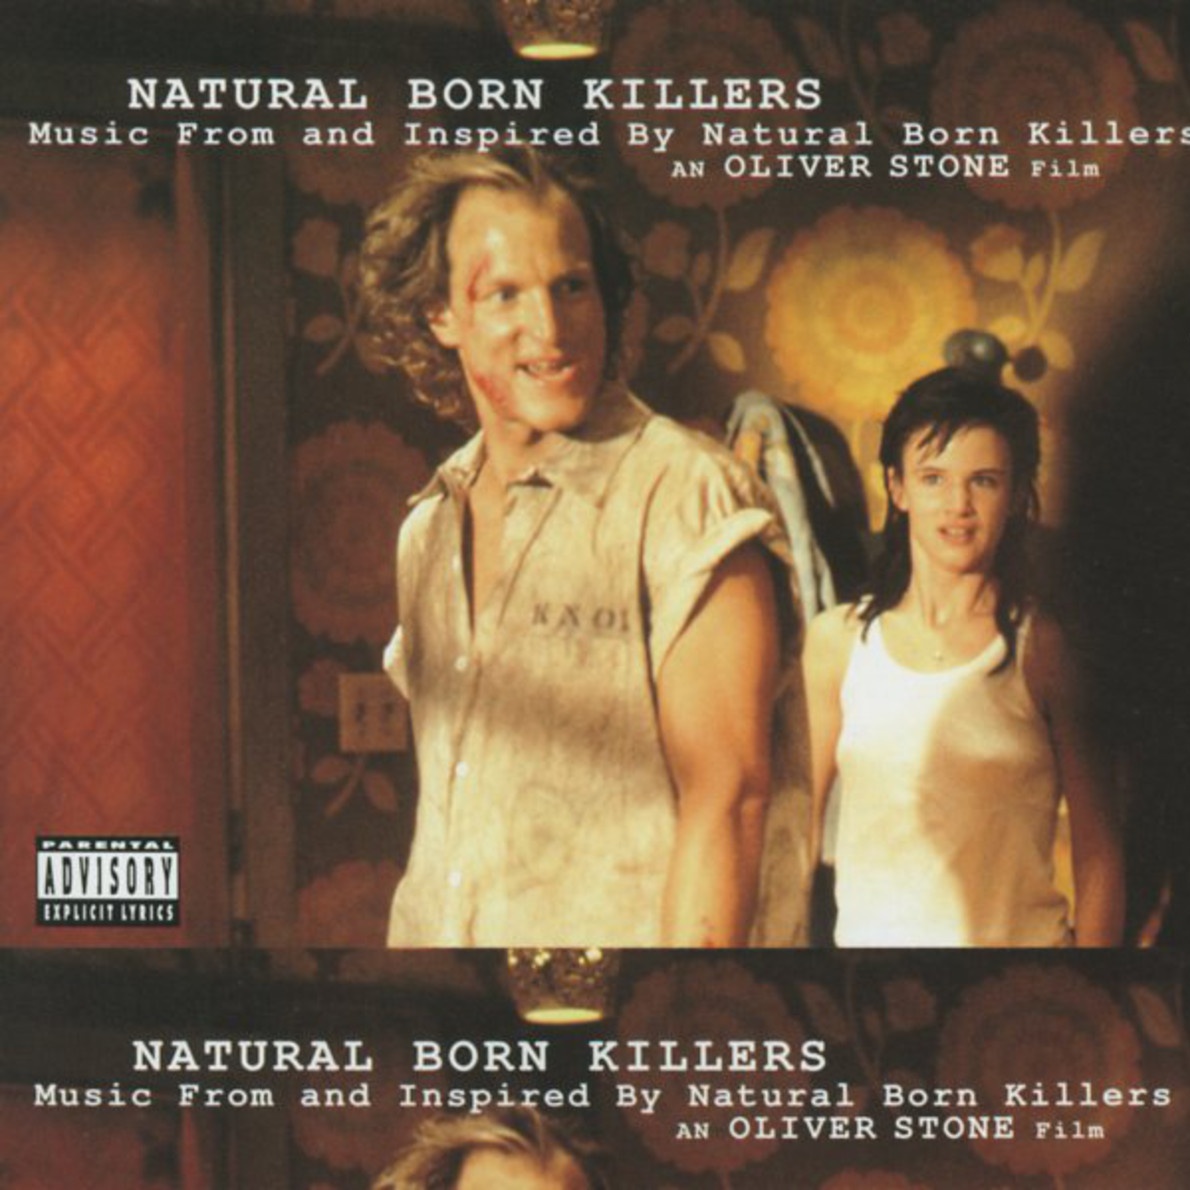 Fall Of The Rebel Angels - From "Natural Born Killers" Soundtrack